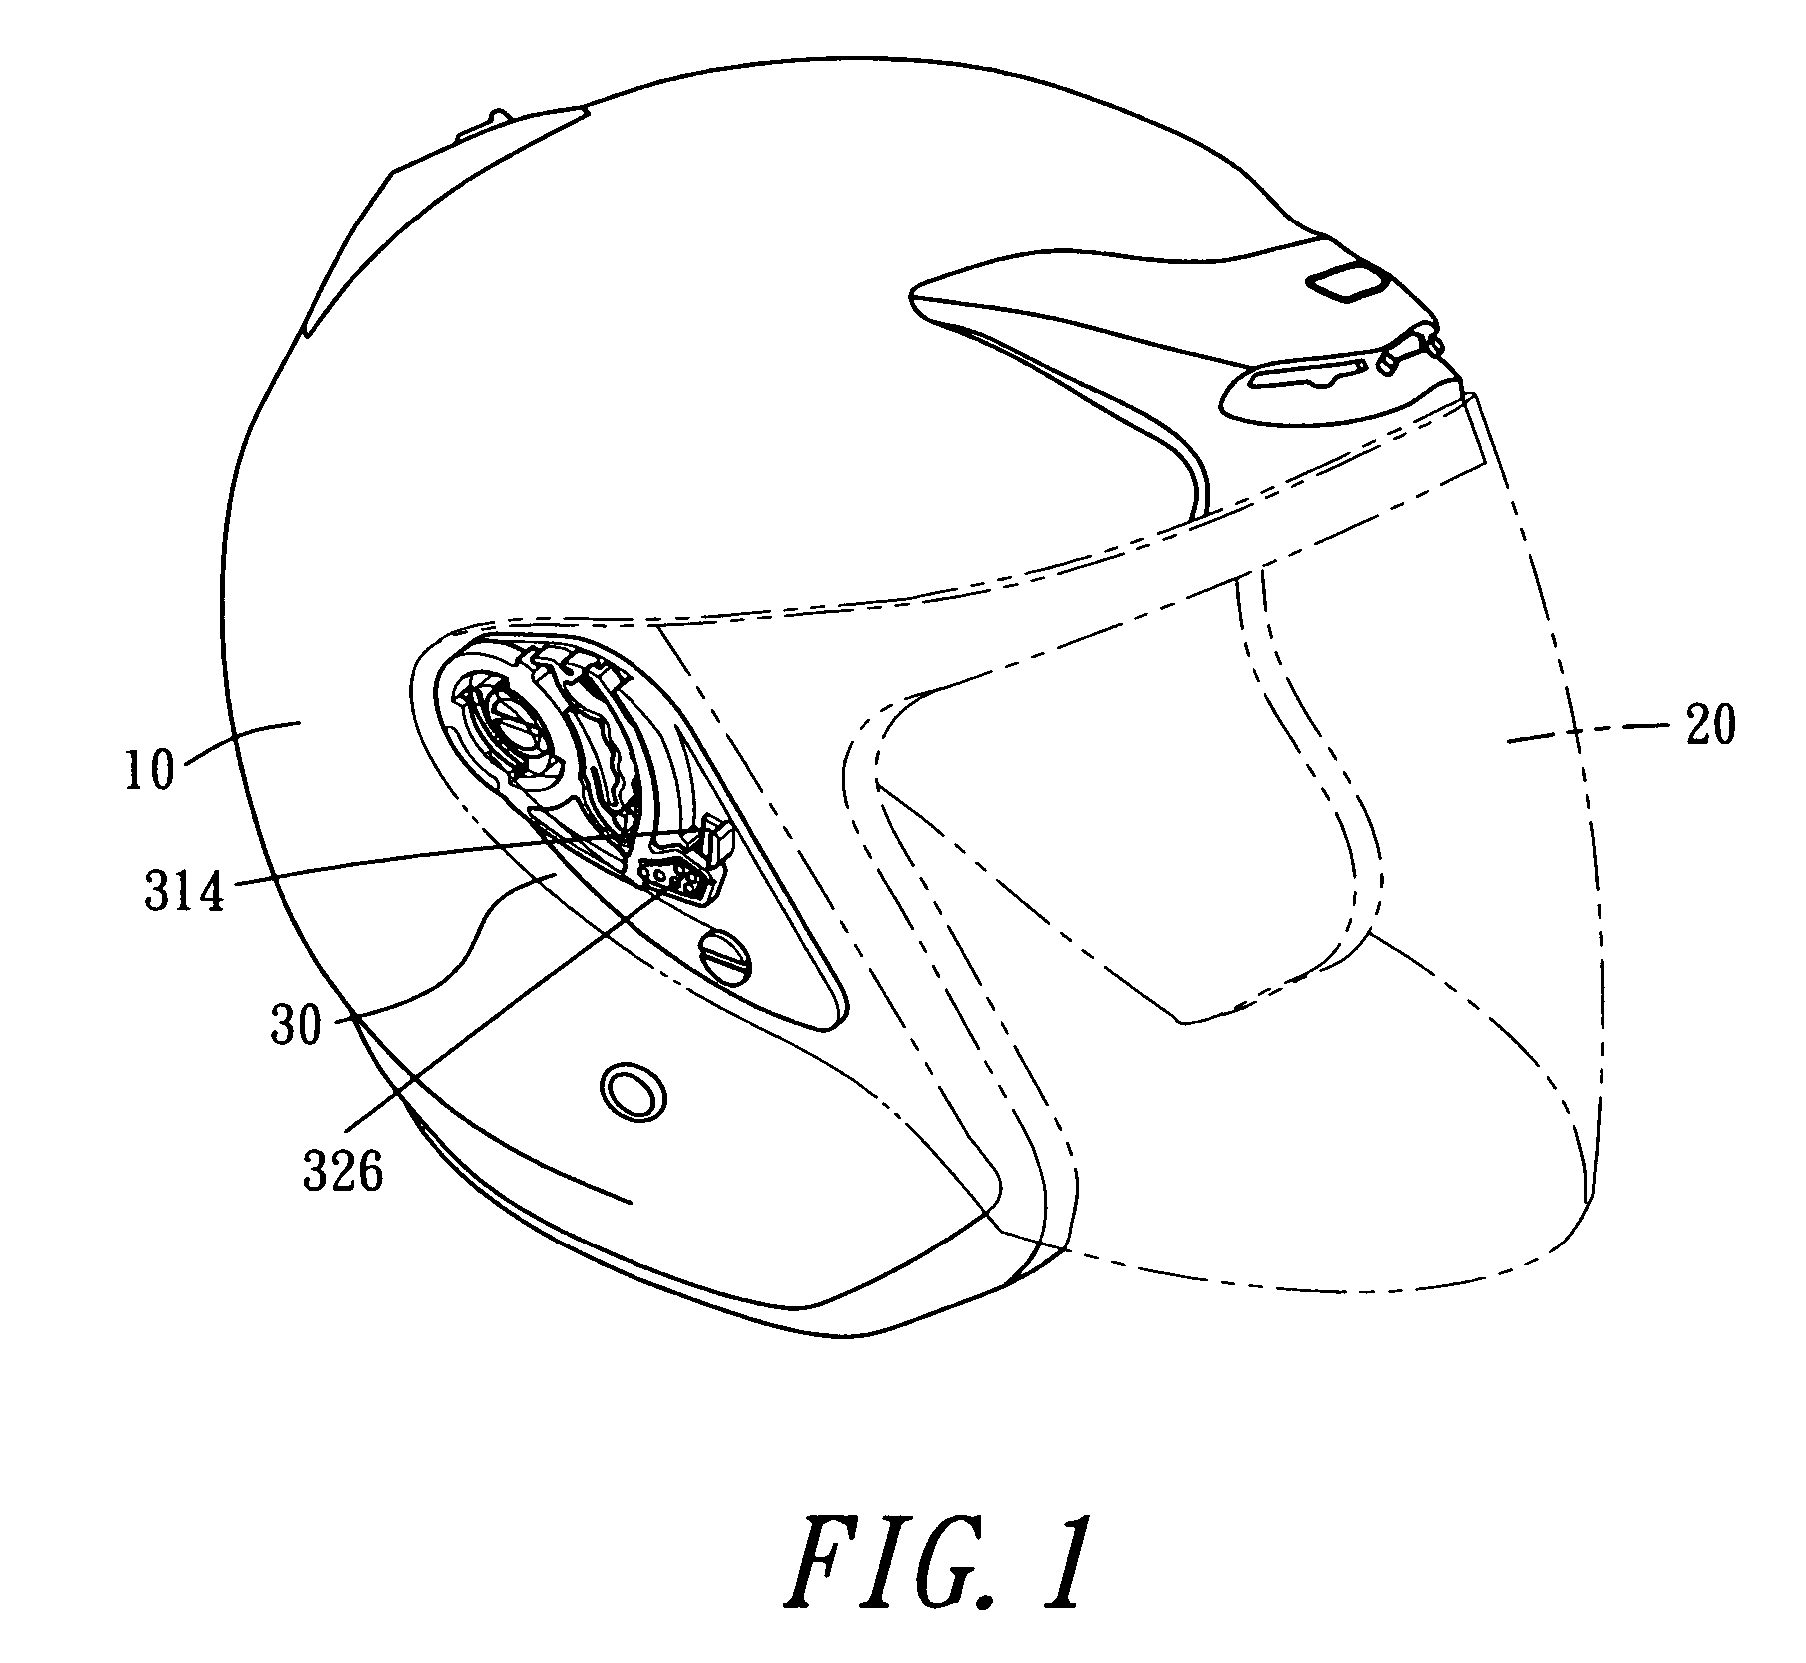 Crash helmet that is assembled easily and rapidly